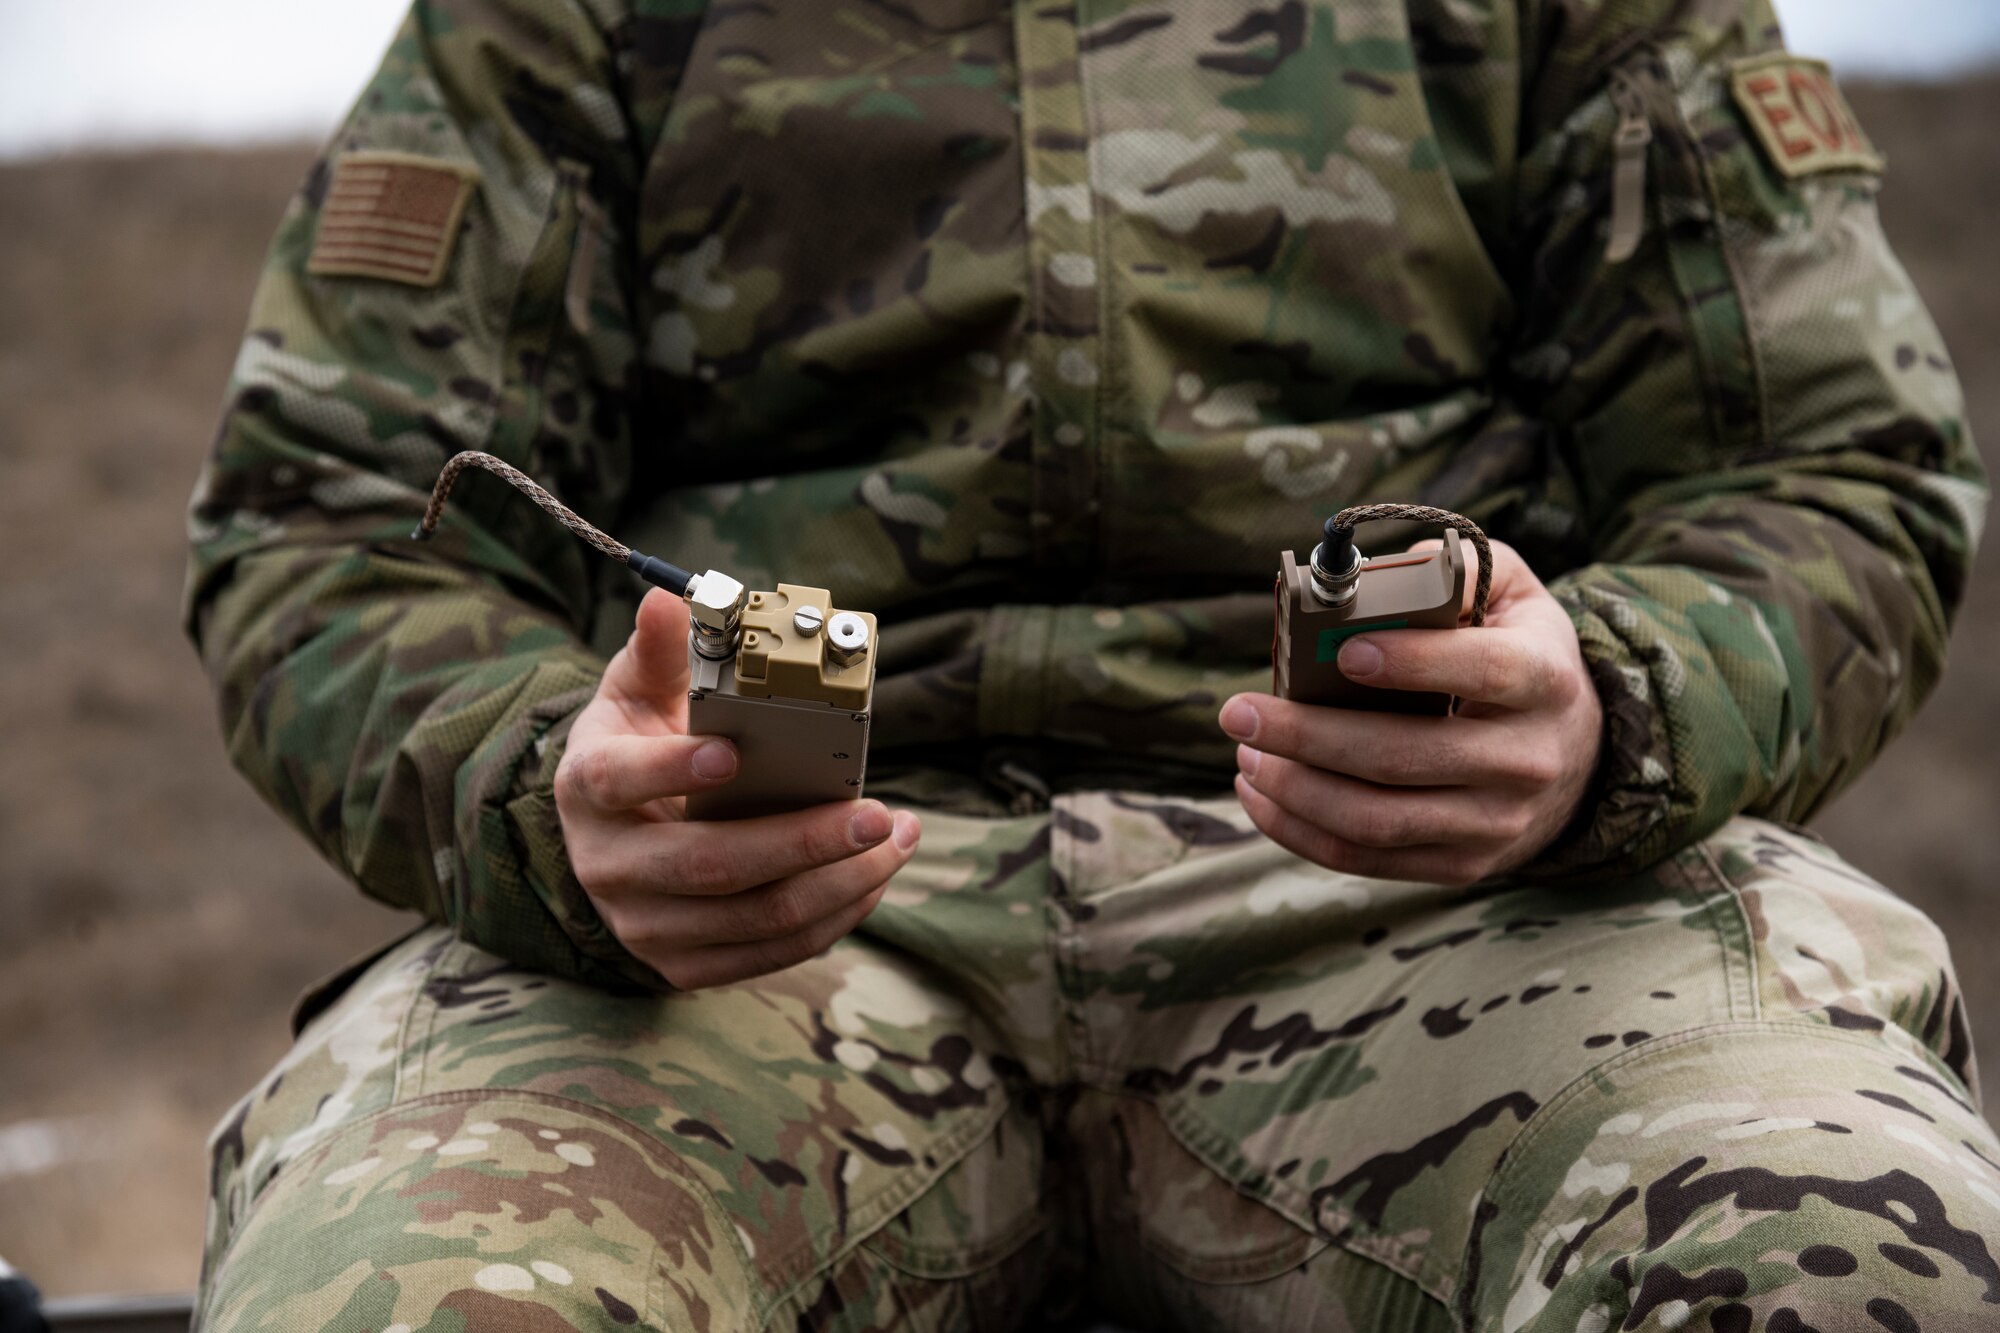 U.S. Air Force Senior Airman Stephen Maloy, 480th Expeditionary Fighter Squadron Explosive Ordnance Disposal technician, sets up a remote detonation device at the 86th Air Base, Romania, March 16, 2022. Using the new innovation technology allows for more C-4 to be saved for other purposes during contingency operations in an austere location. (U.S. Air Force photo by Senior Airman Ali Stewart)